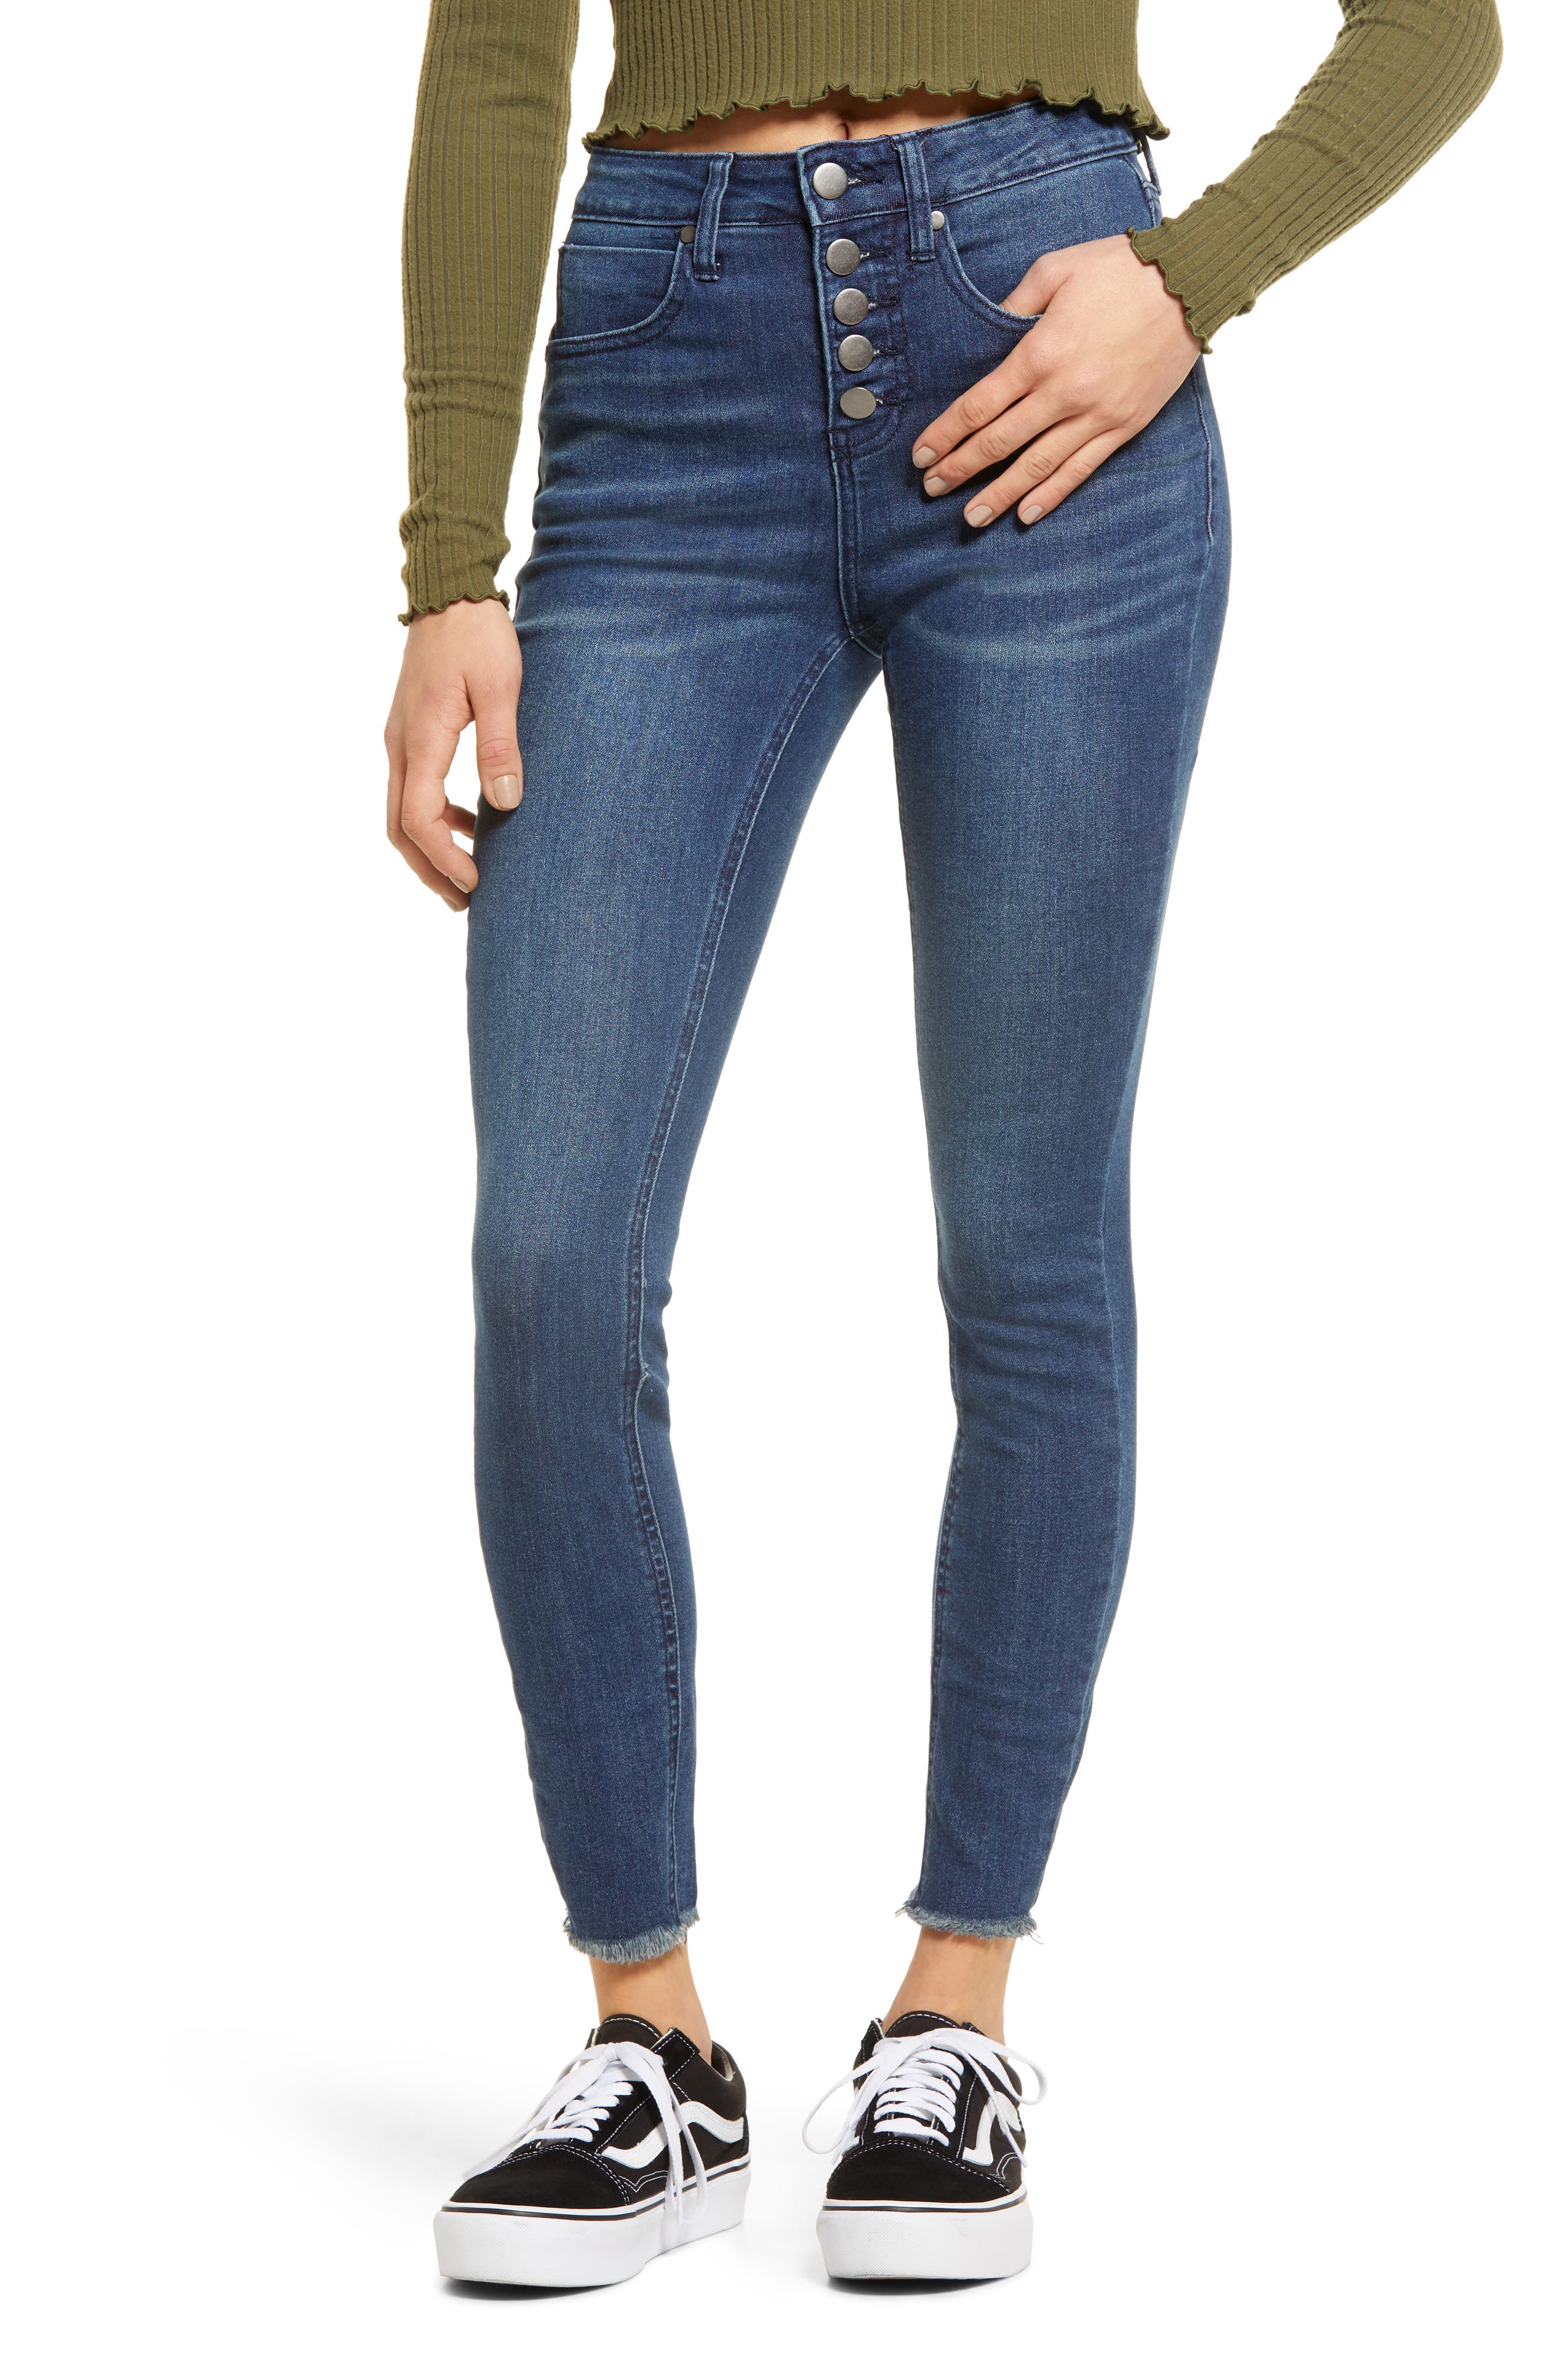 button jeans womens